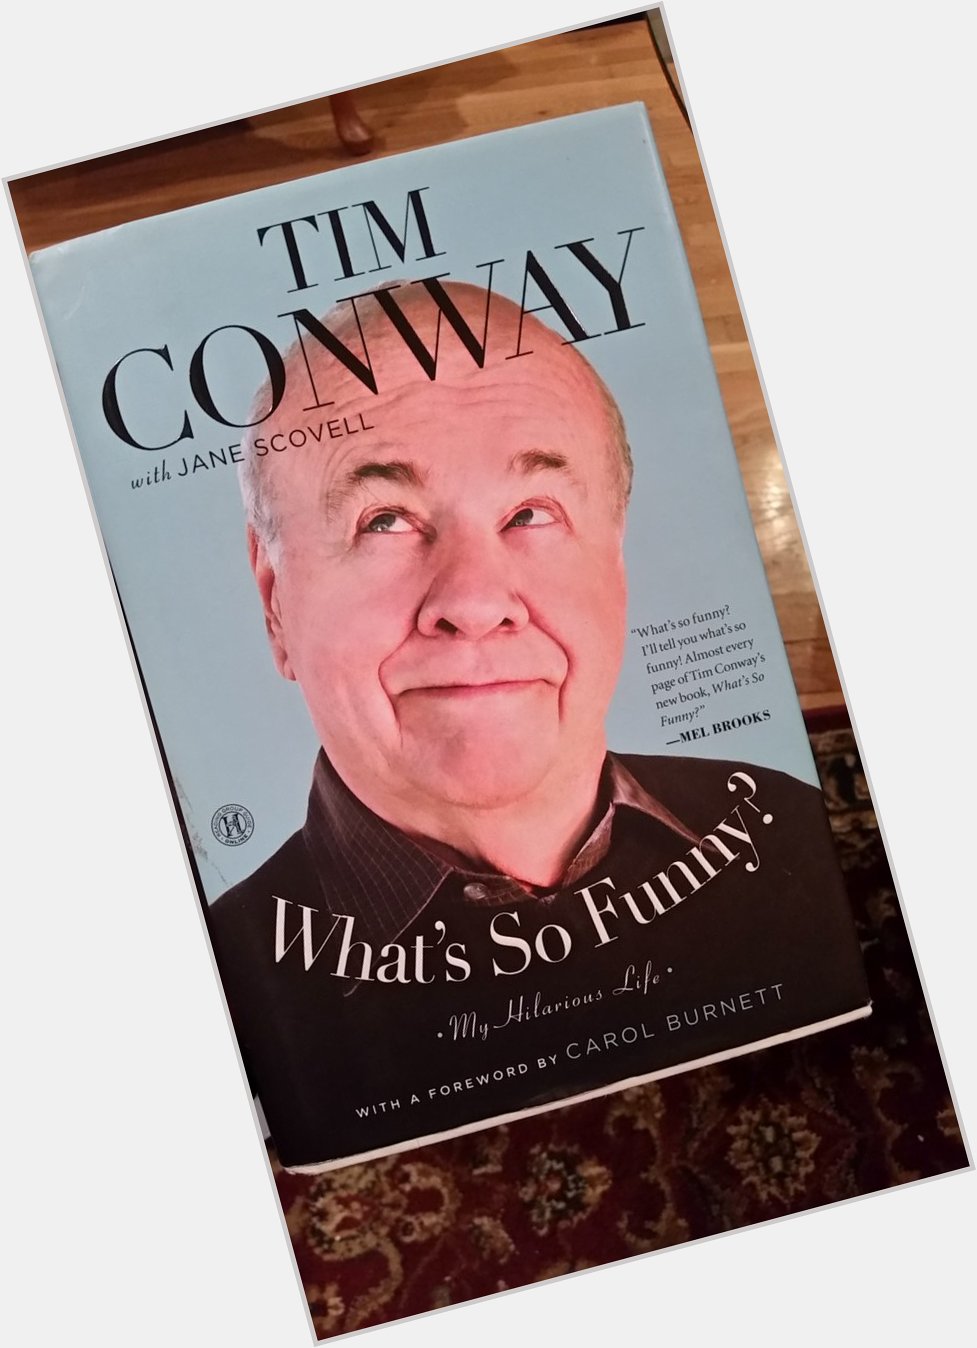 Happy birthday, Tim Conway! One of the funniest people around, and this is one of the funniest books I\ve read. 